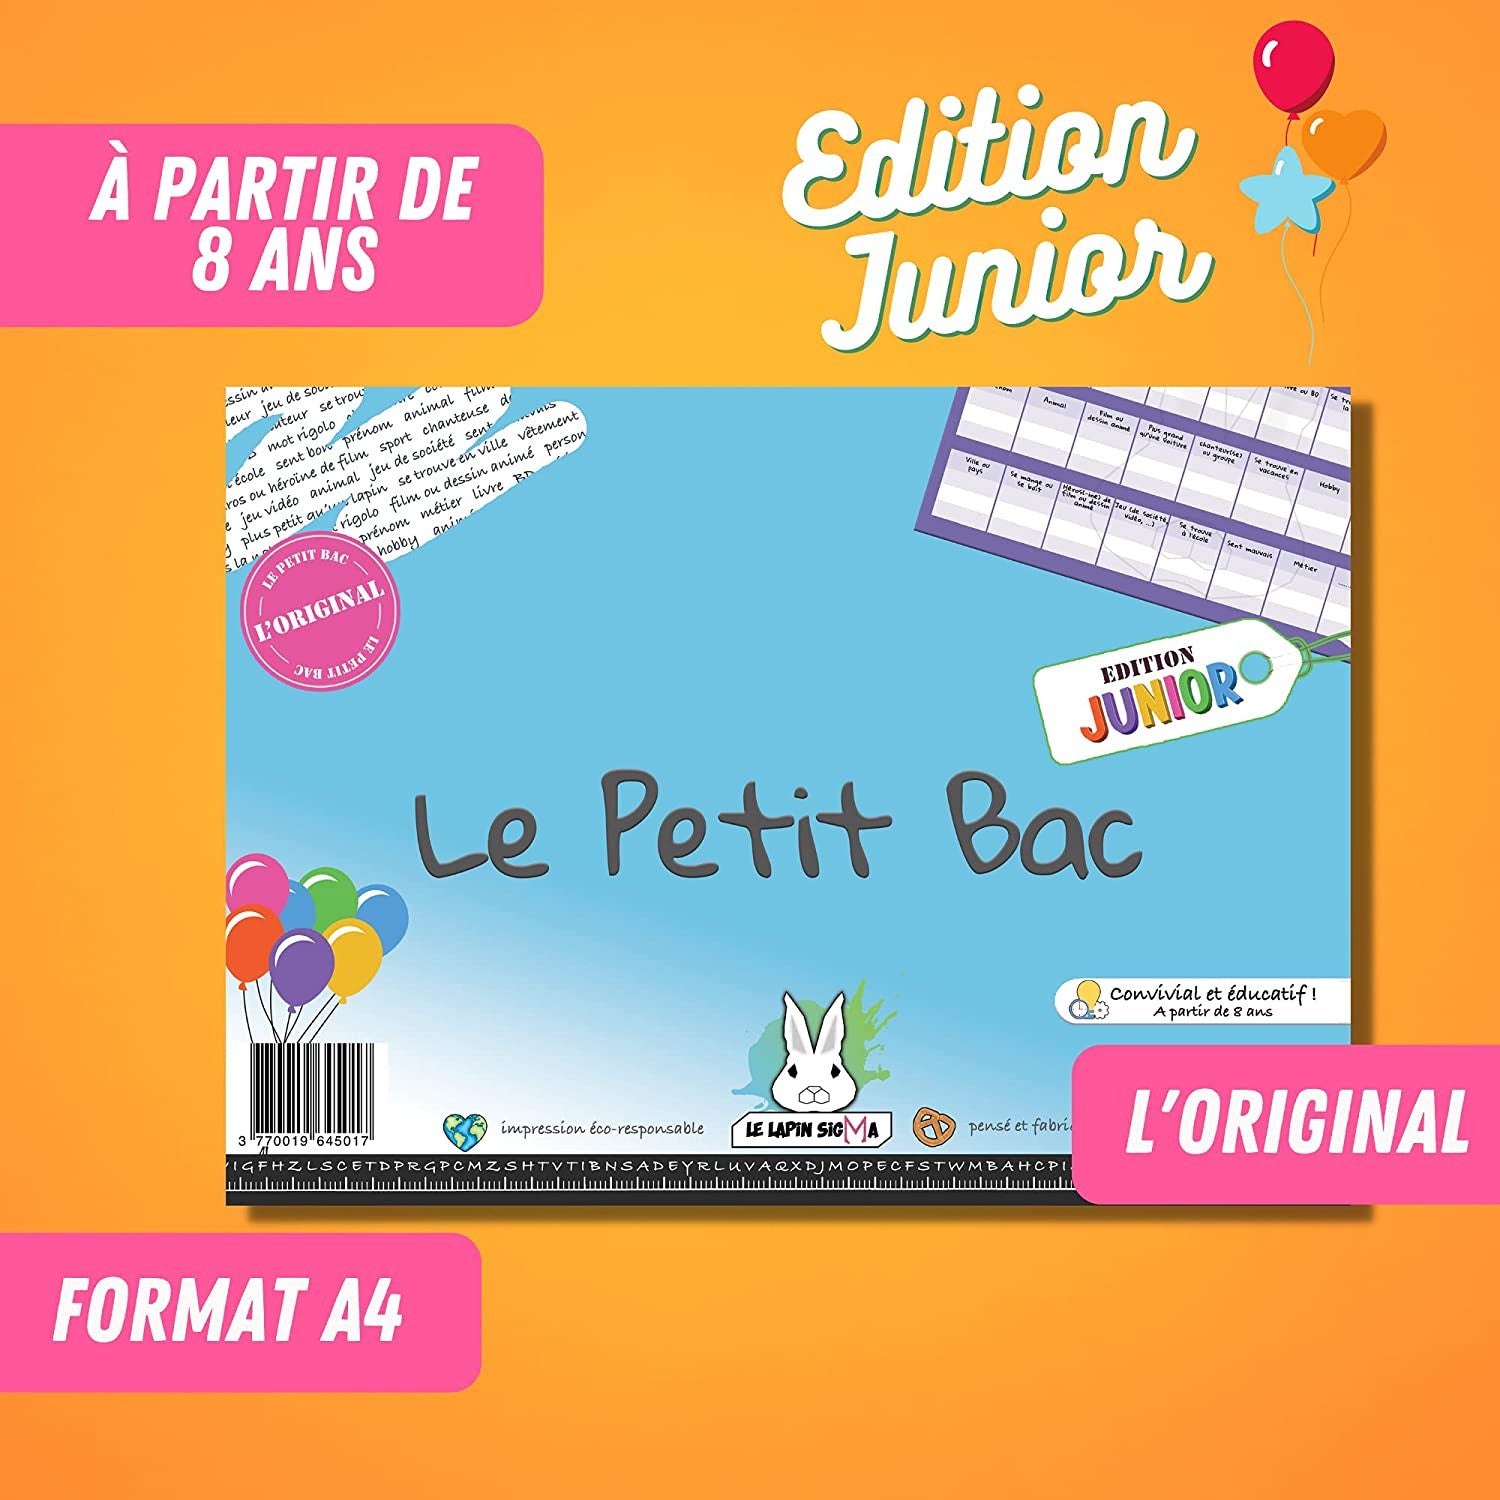 Le petit Bac Junior version - Made in France - The Sigma Rabbit